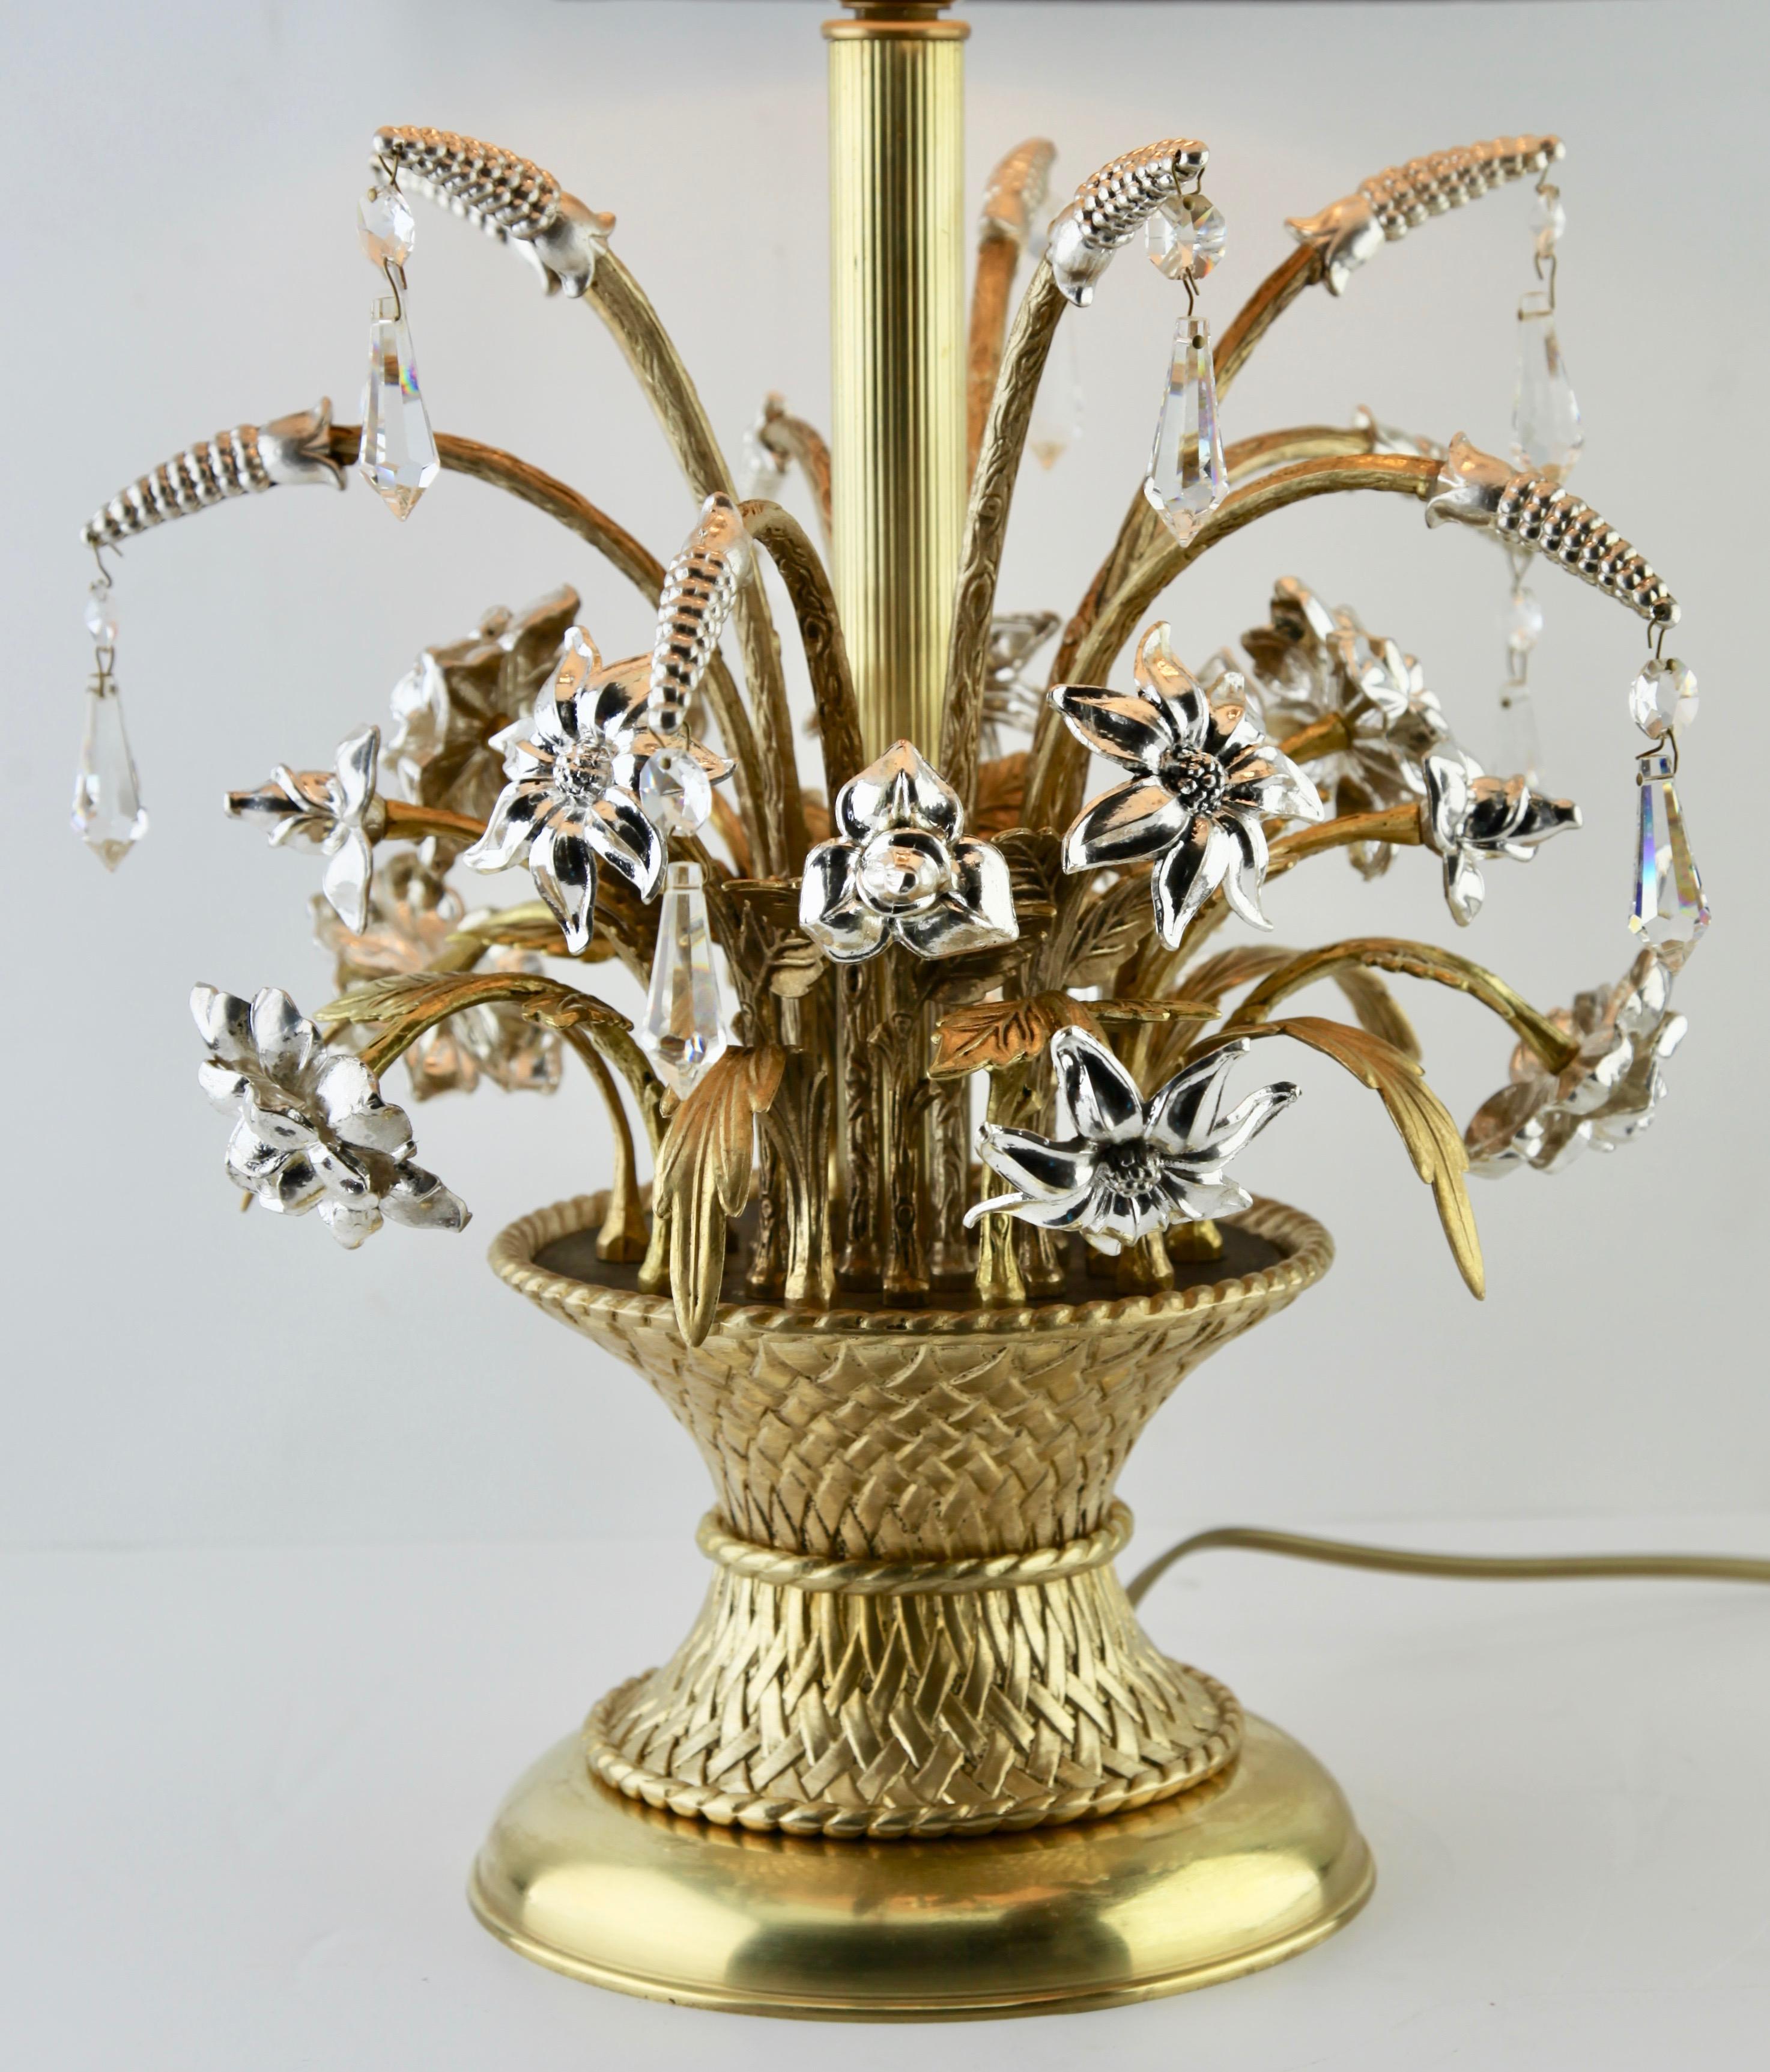 Cast Lamp Representing a Bouquet of Brass and Silver Metal Flowers in a Basket, 1960s For Sale